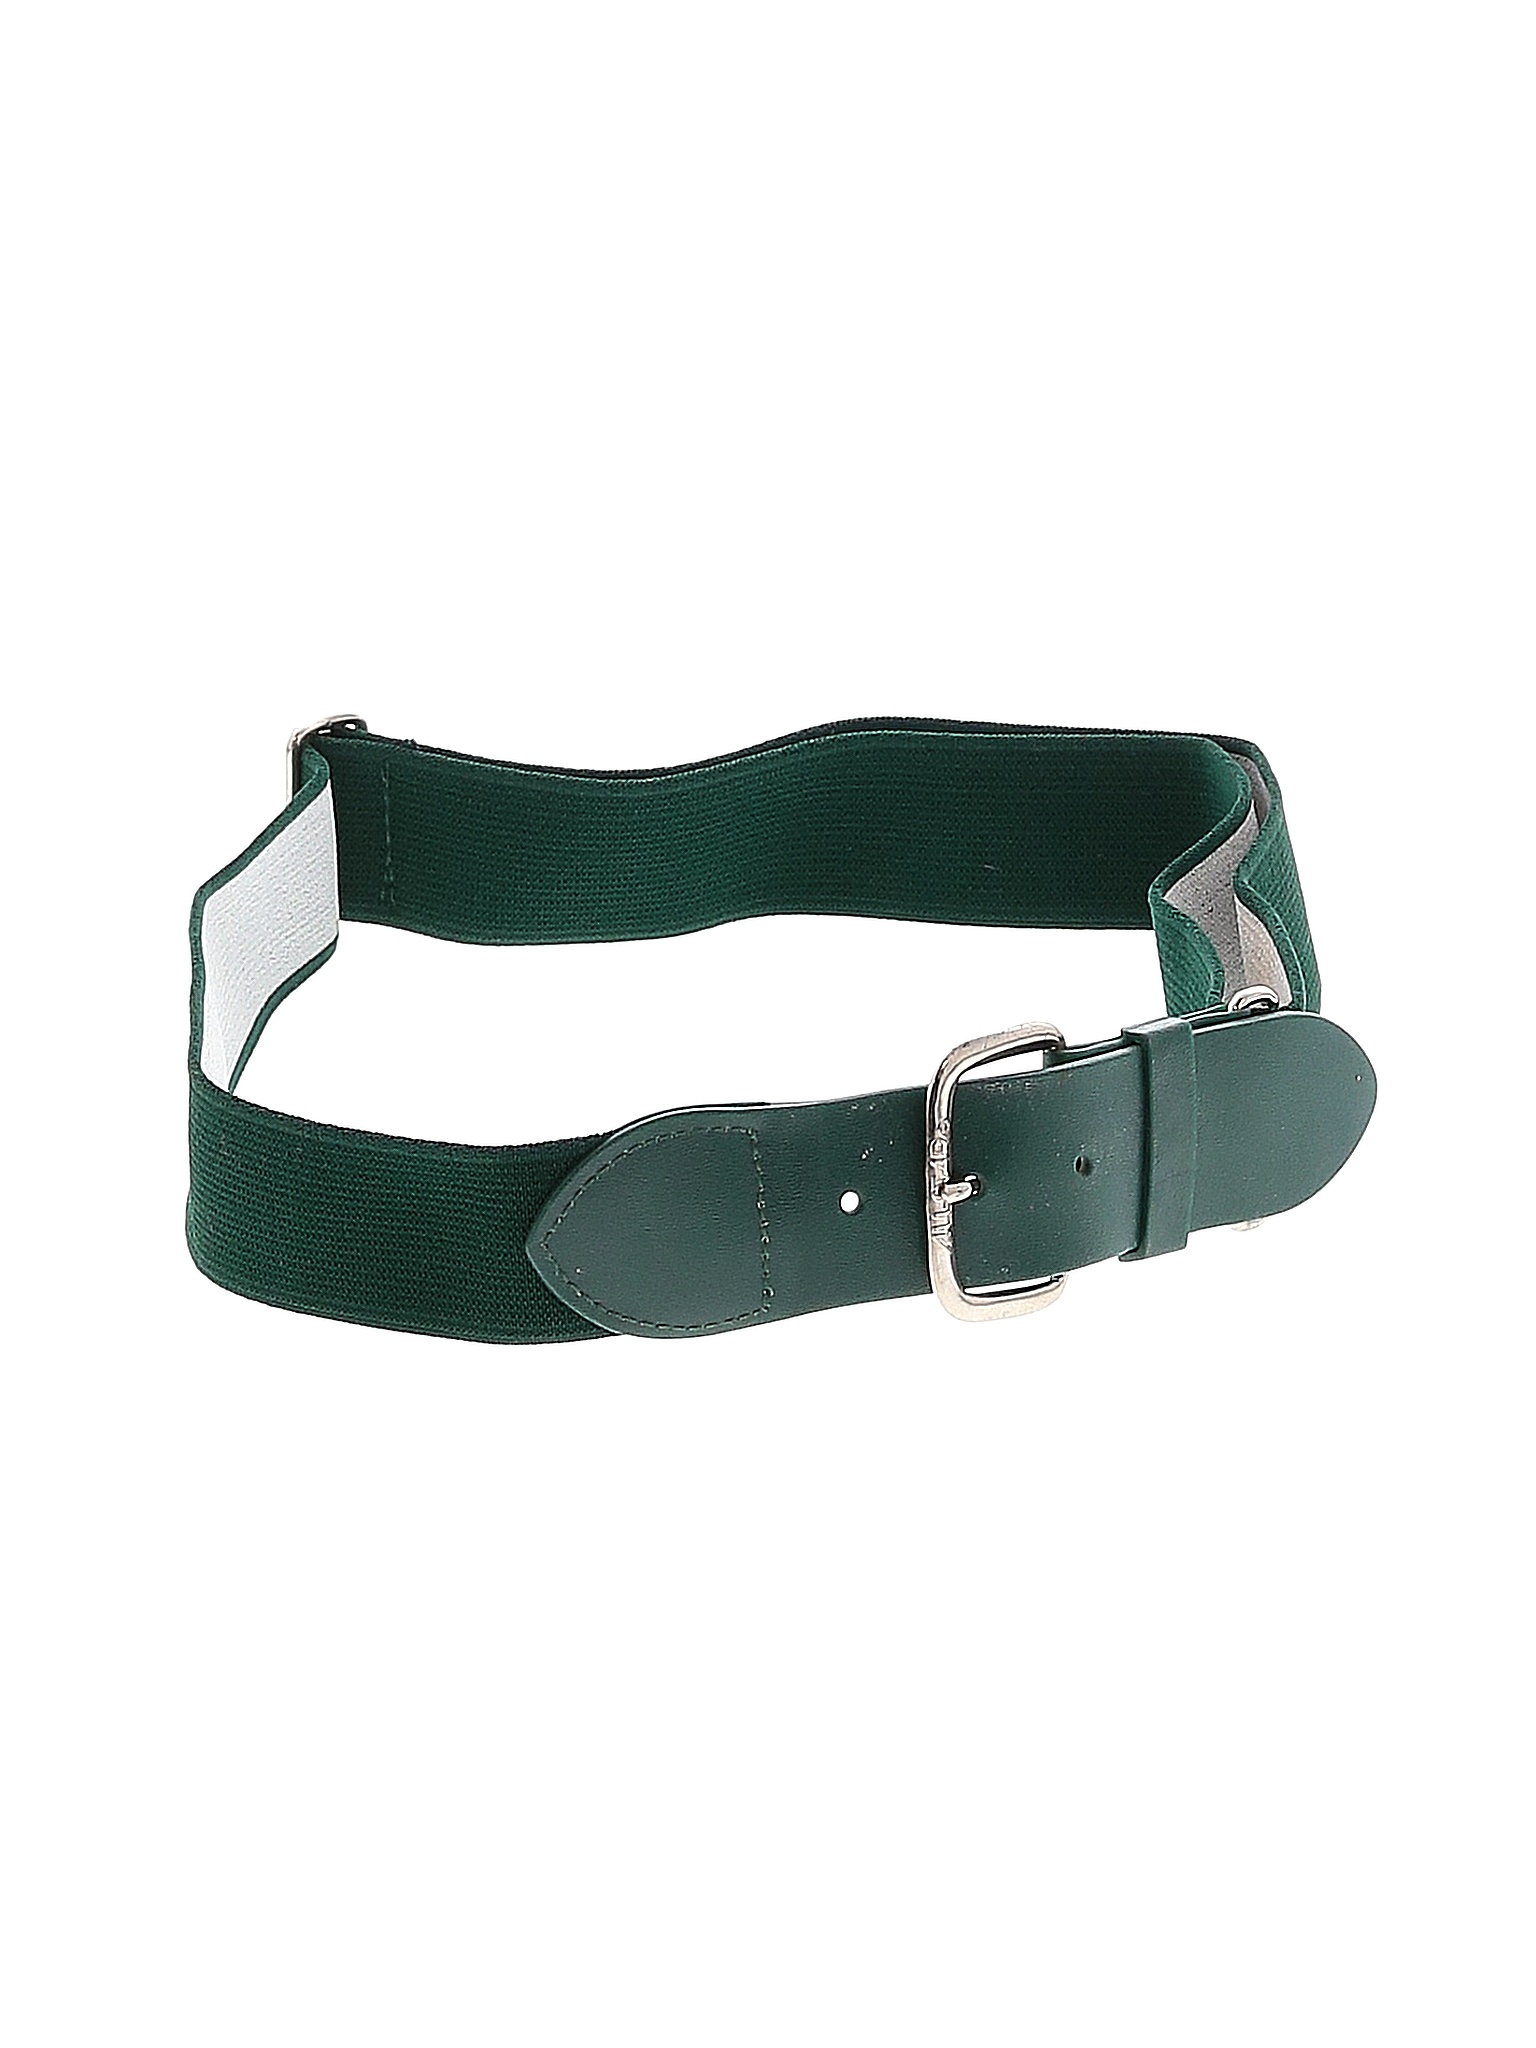 All Star Solid Green Belt One Size (Youth) - 53% off | thredUP